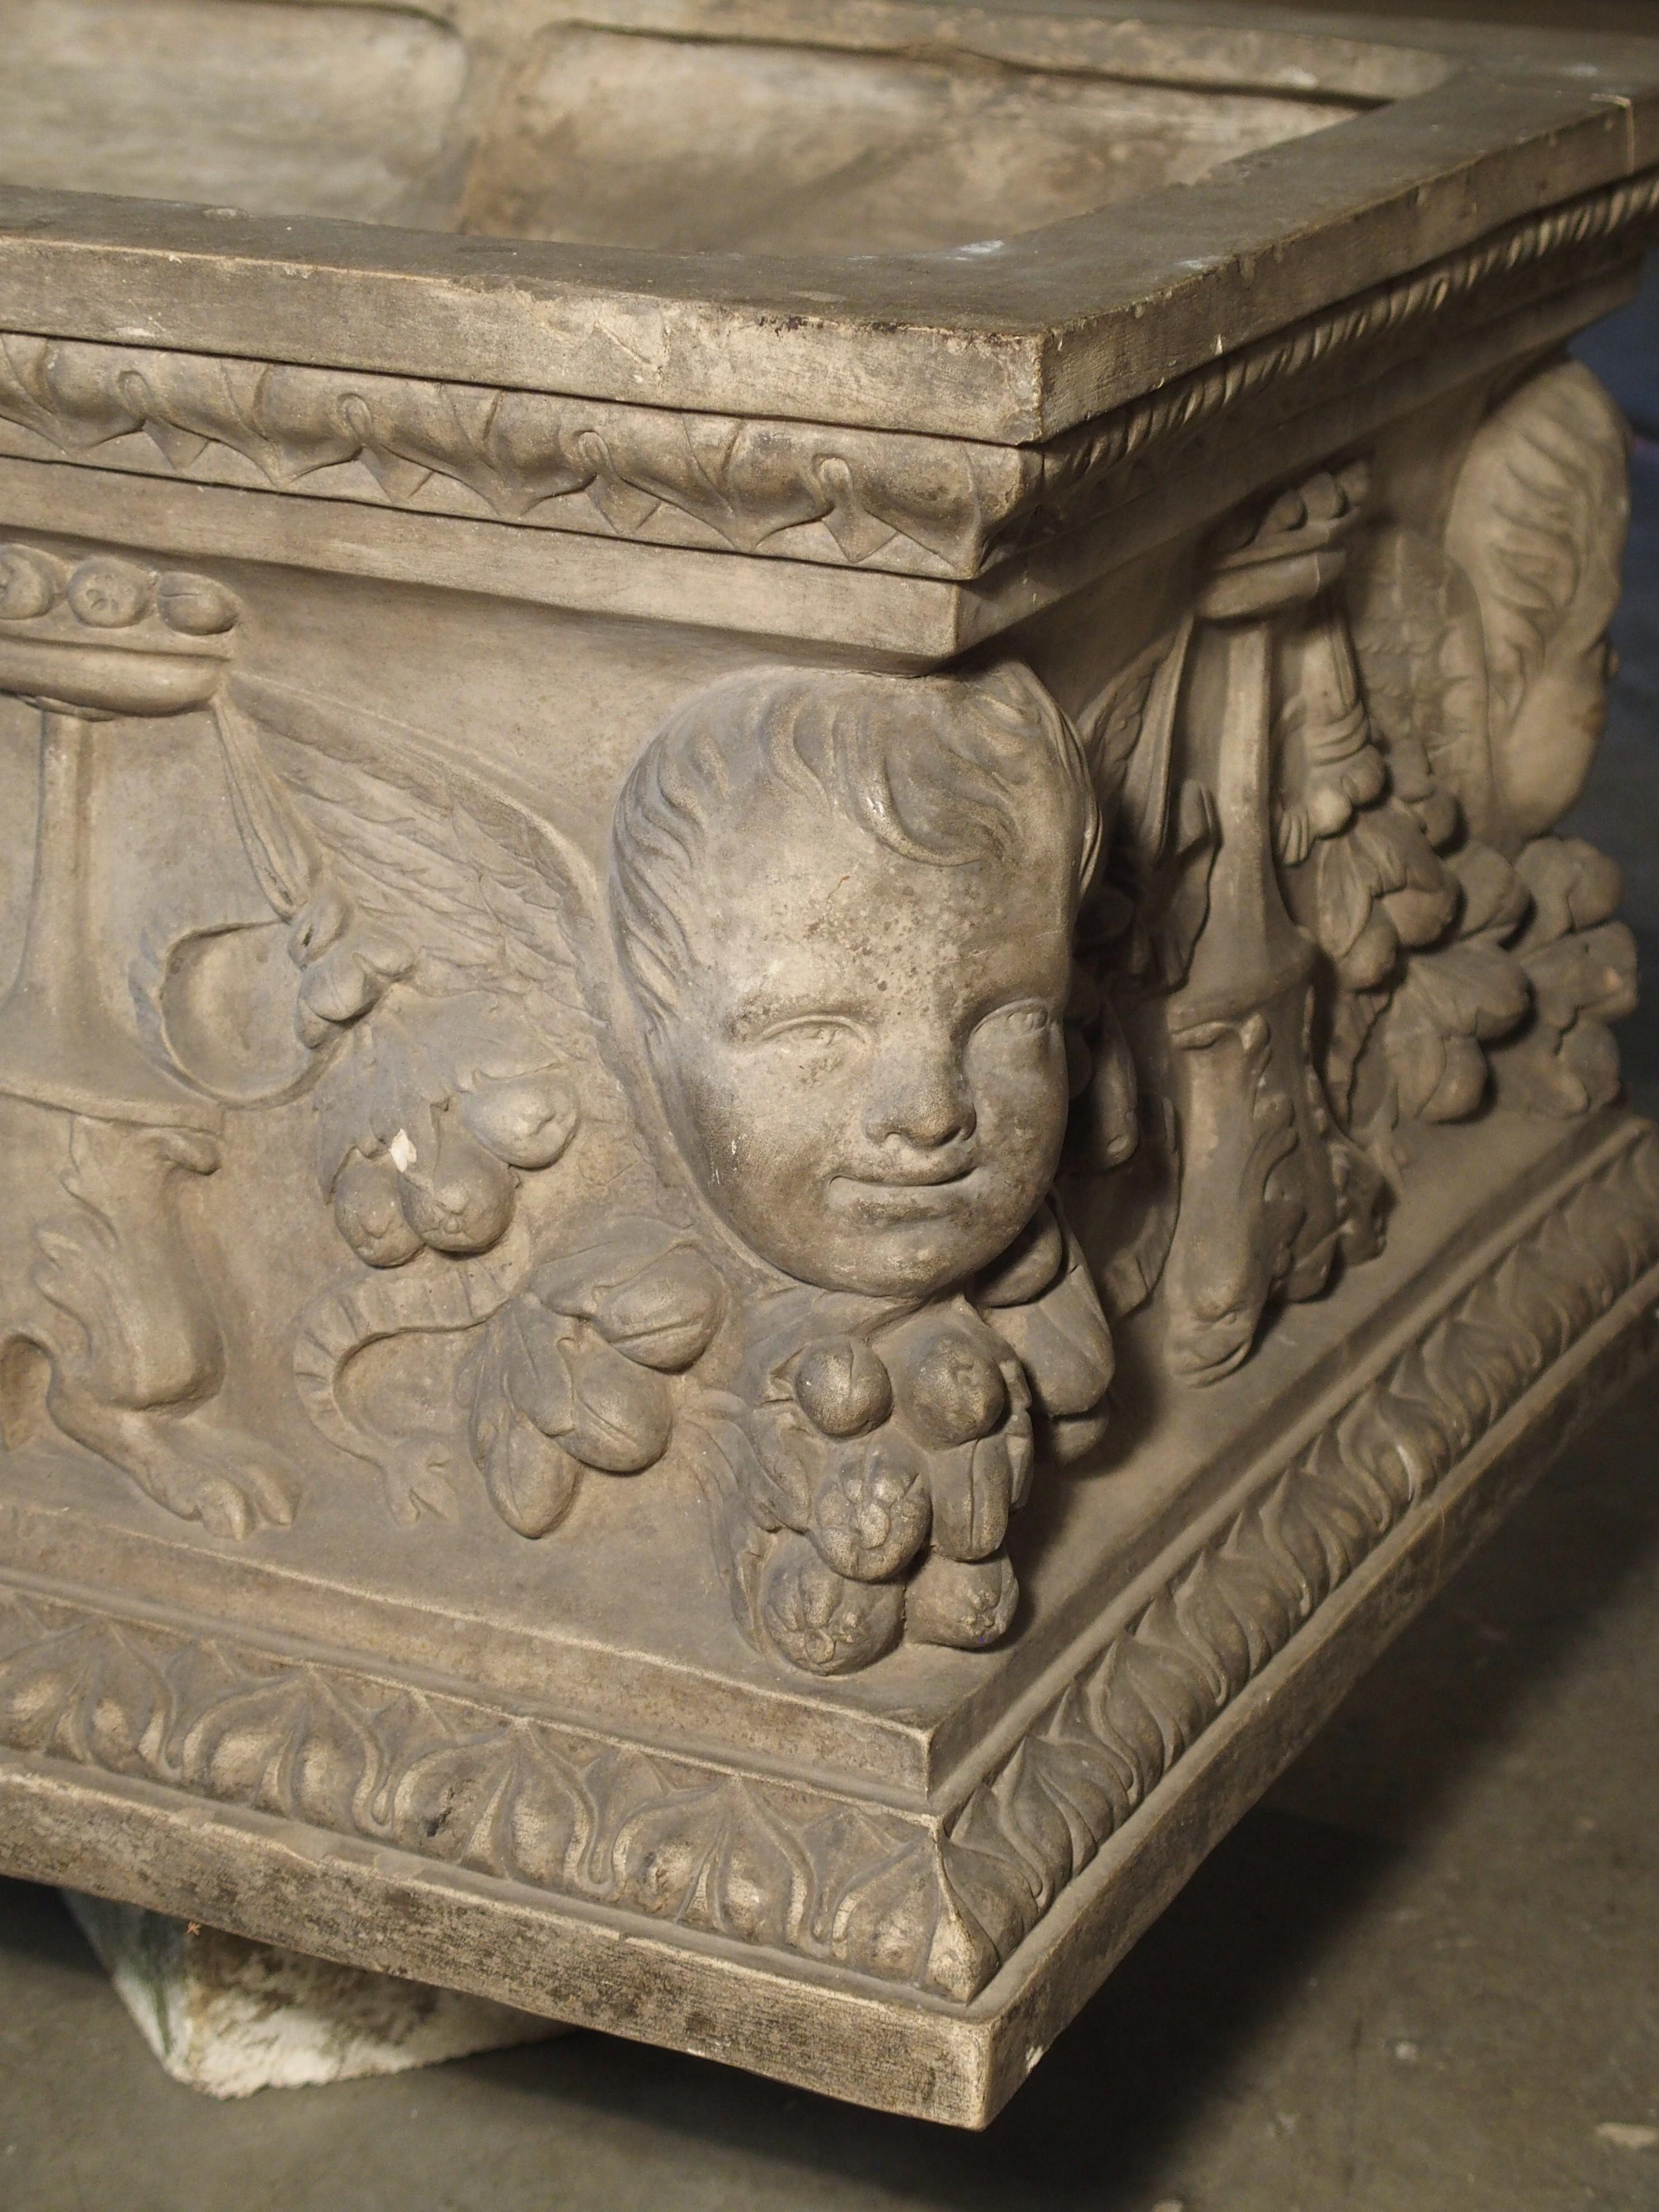 Antique Italian Terracotta Planter with Winged Cherubs and Garlands 15